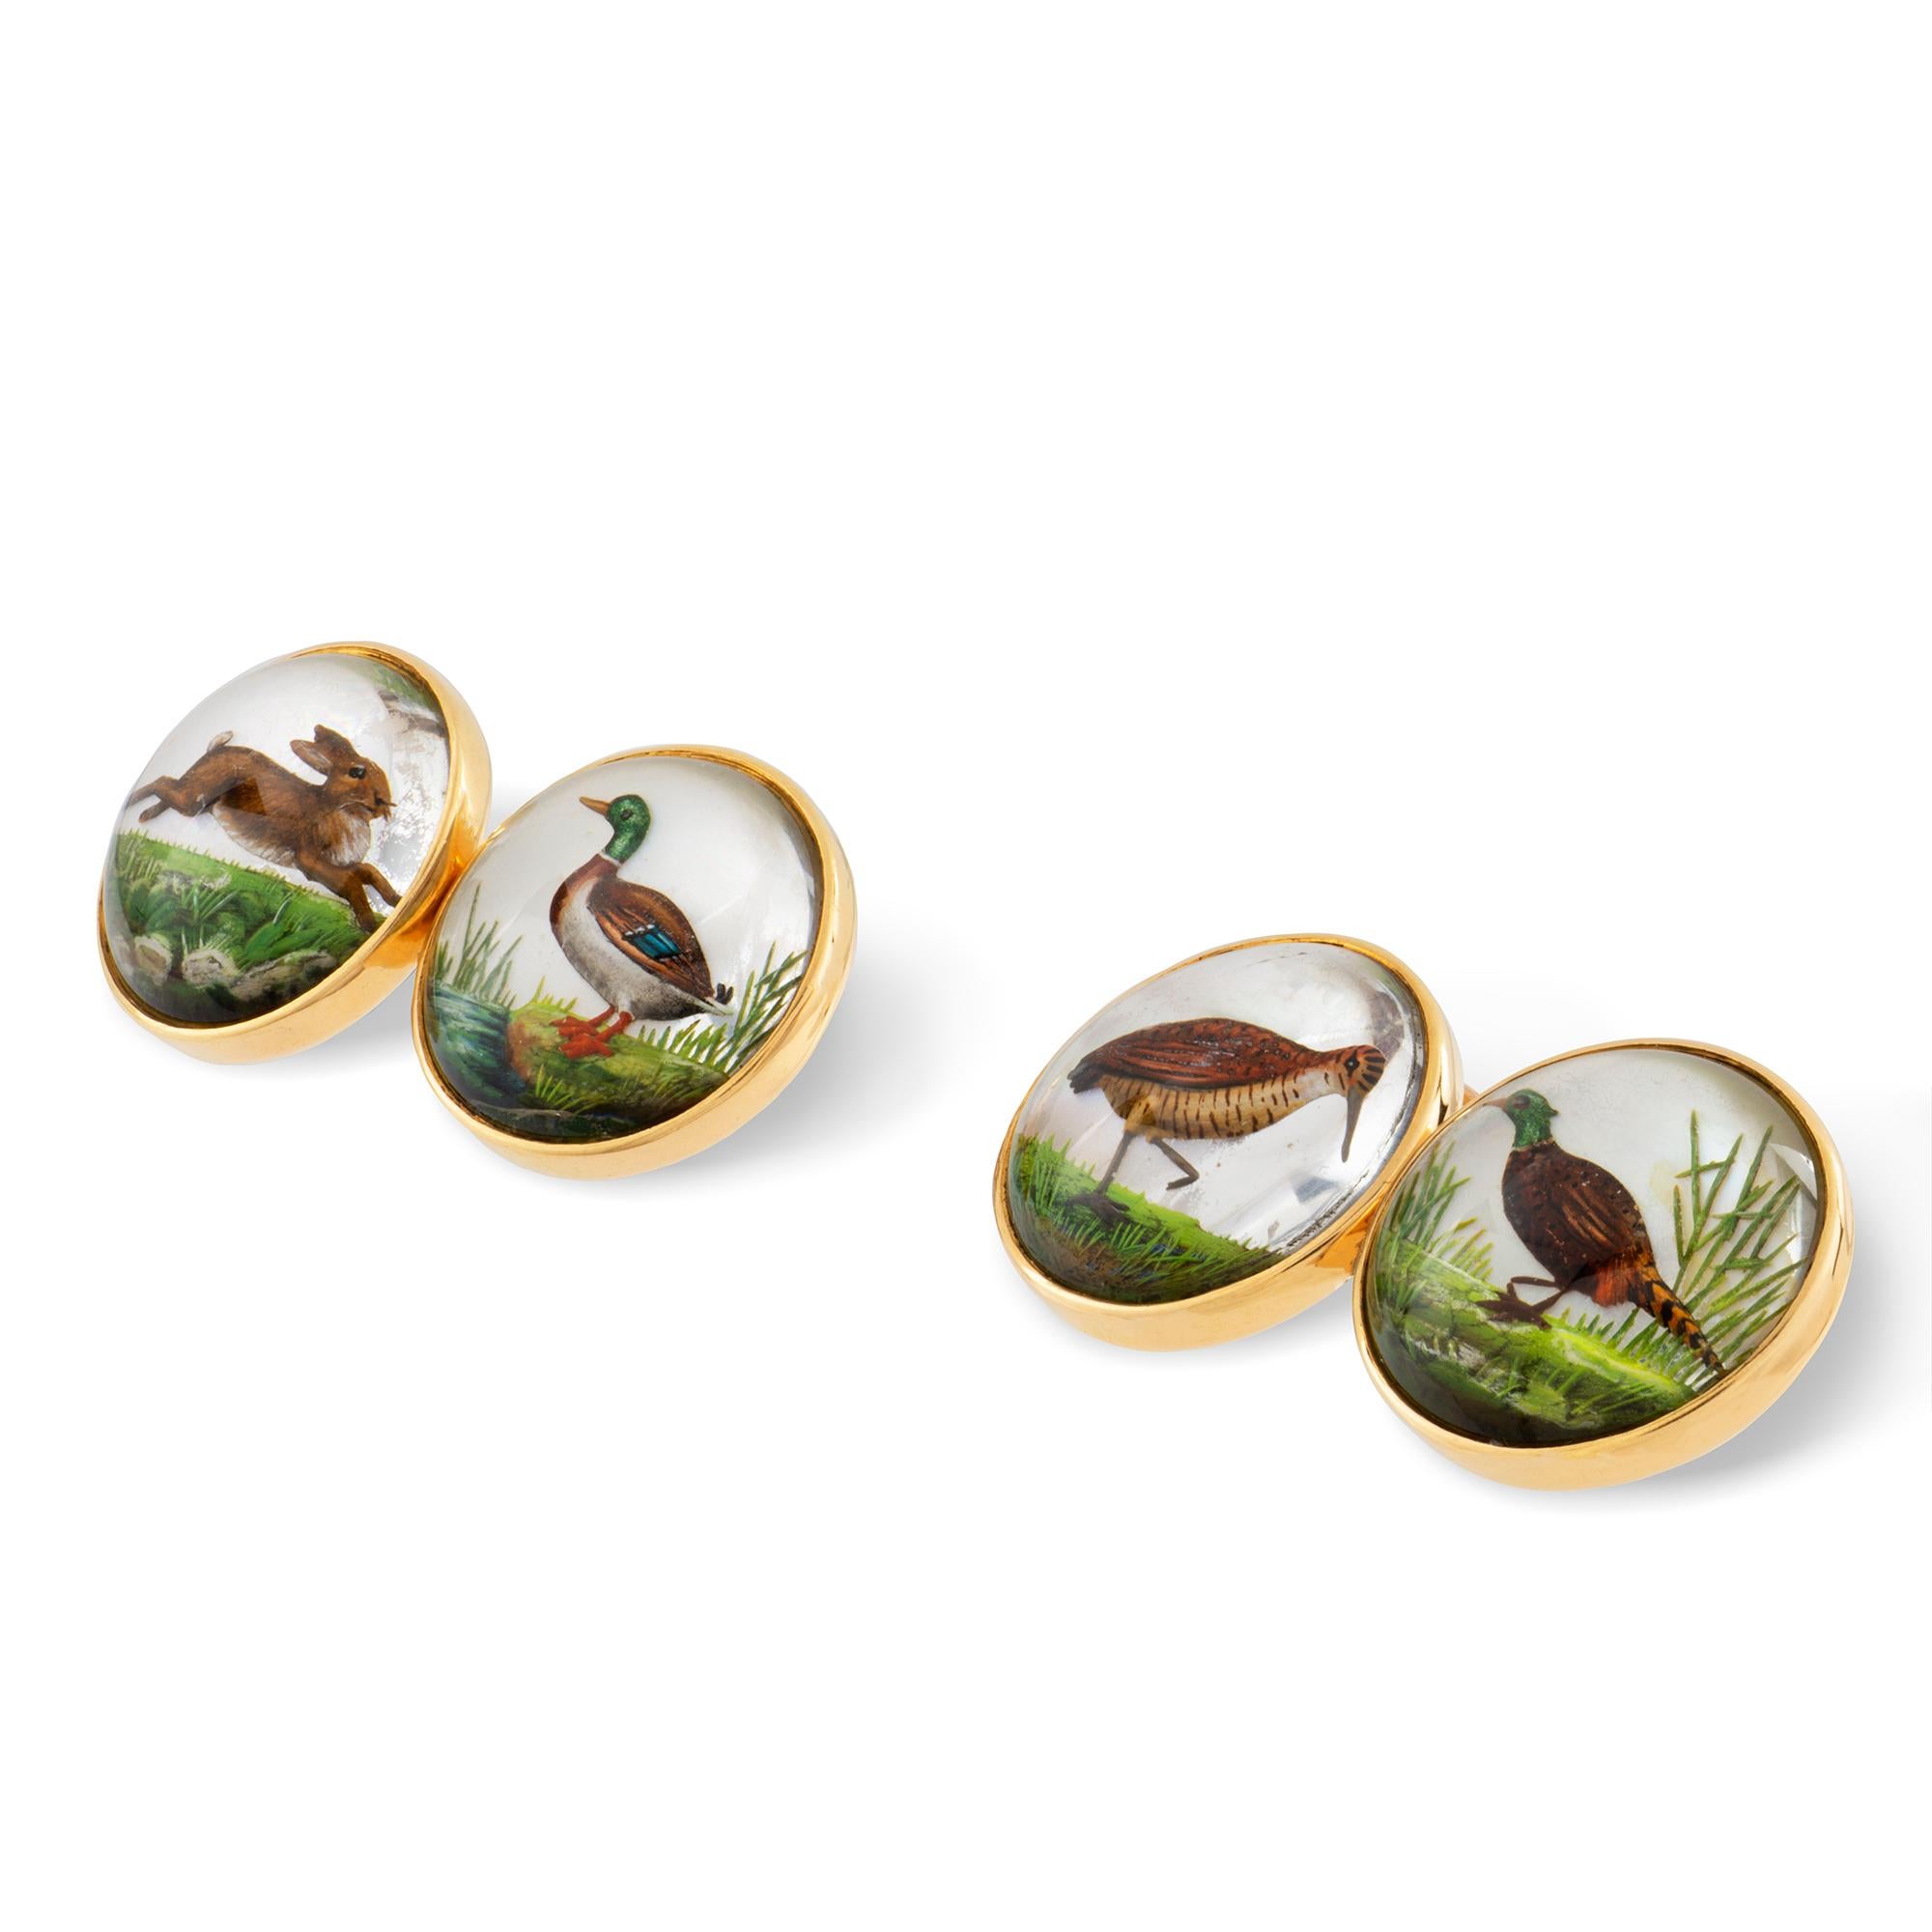 A pair of Dunhill reverse intaglio crystal cufflinks, the cabochon-cut crystal faces each depicting different game animal, measuring approximately 1.4cm in diameter, set on an 18 carat gold rubover mount with gold link fittings, made by Dunhill